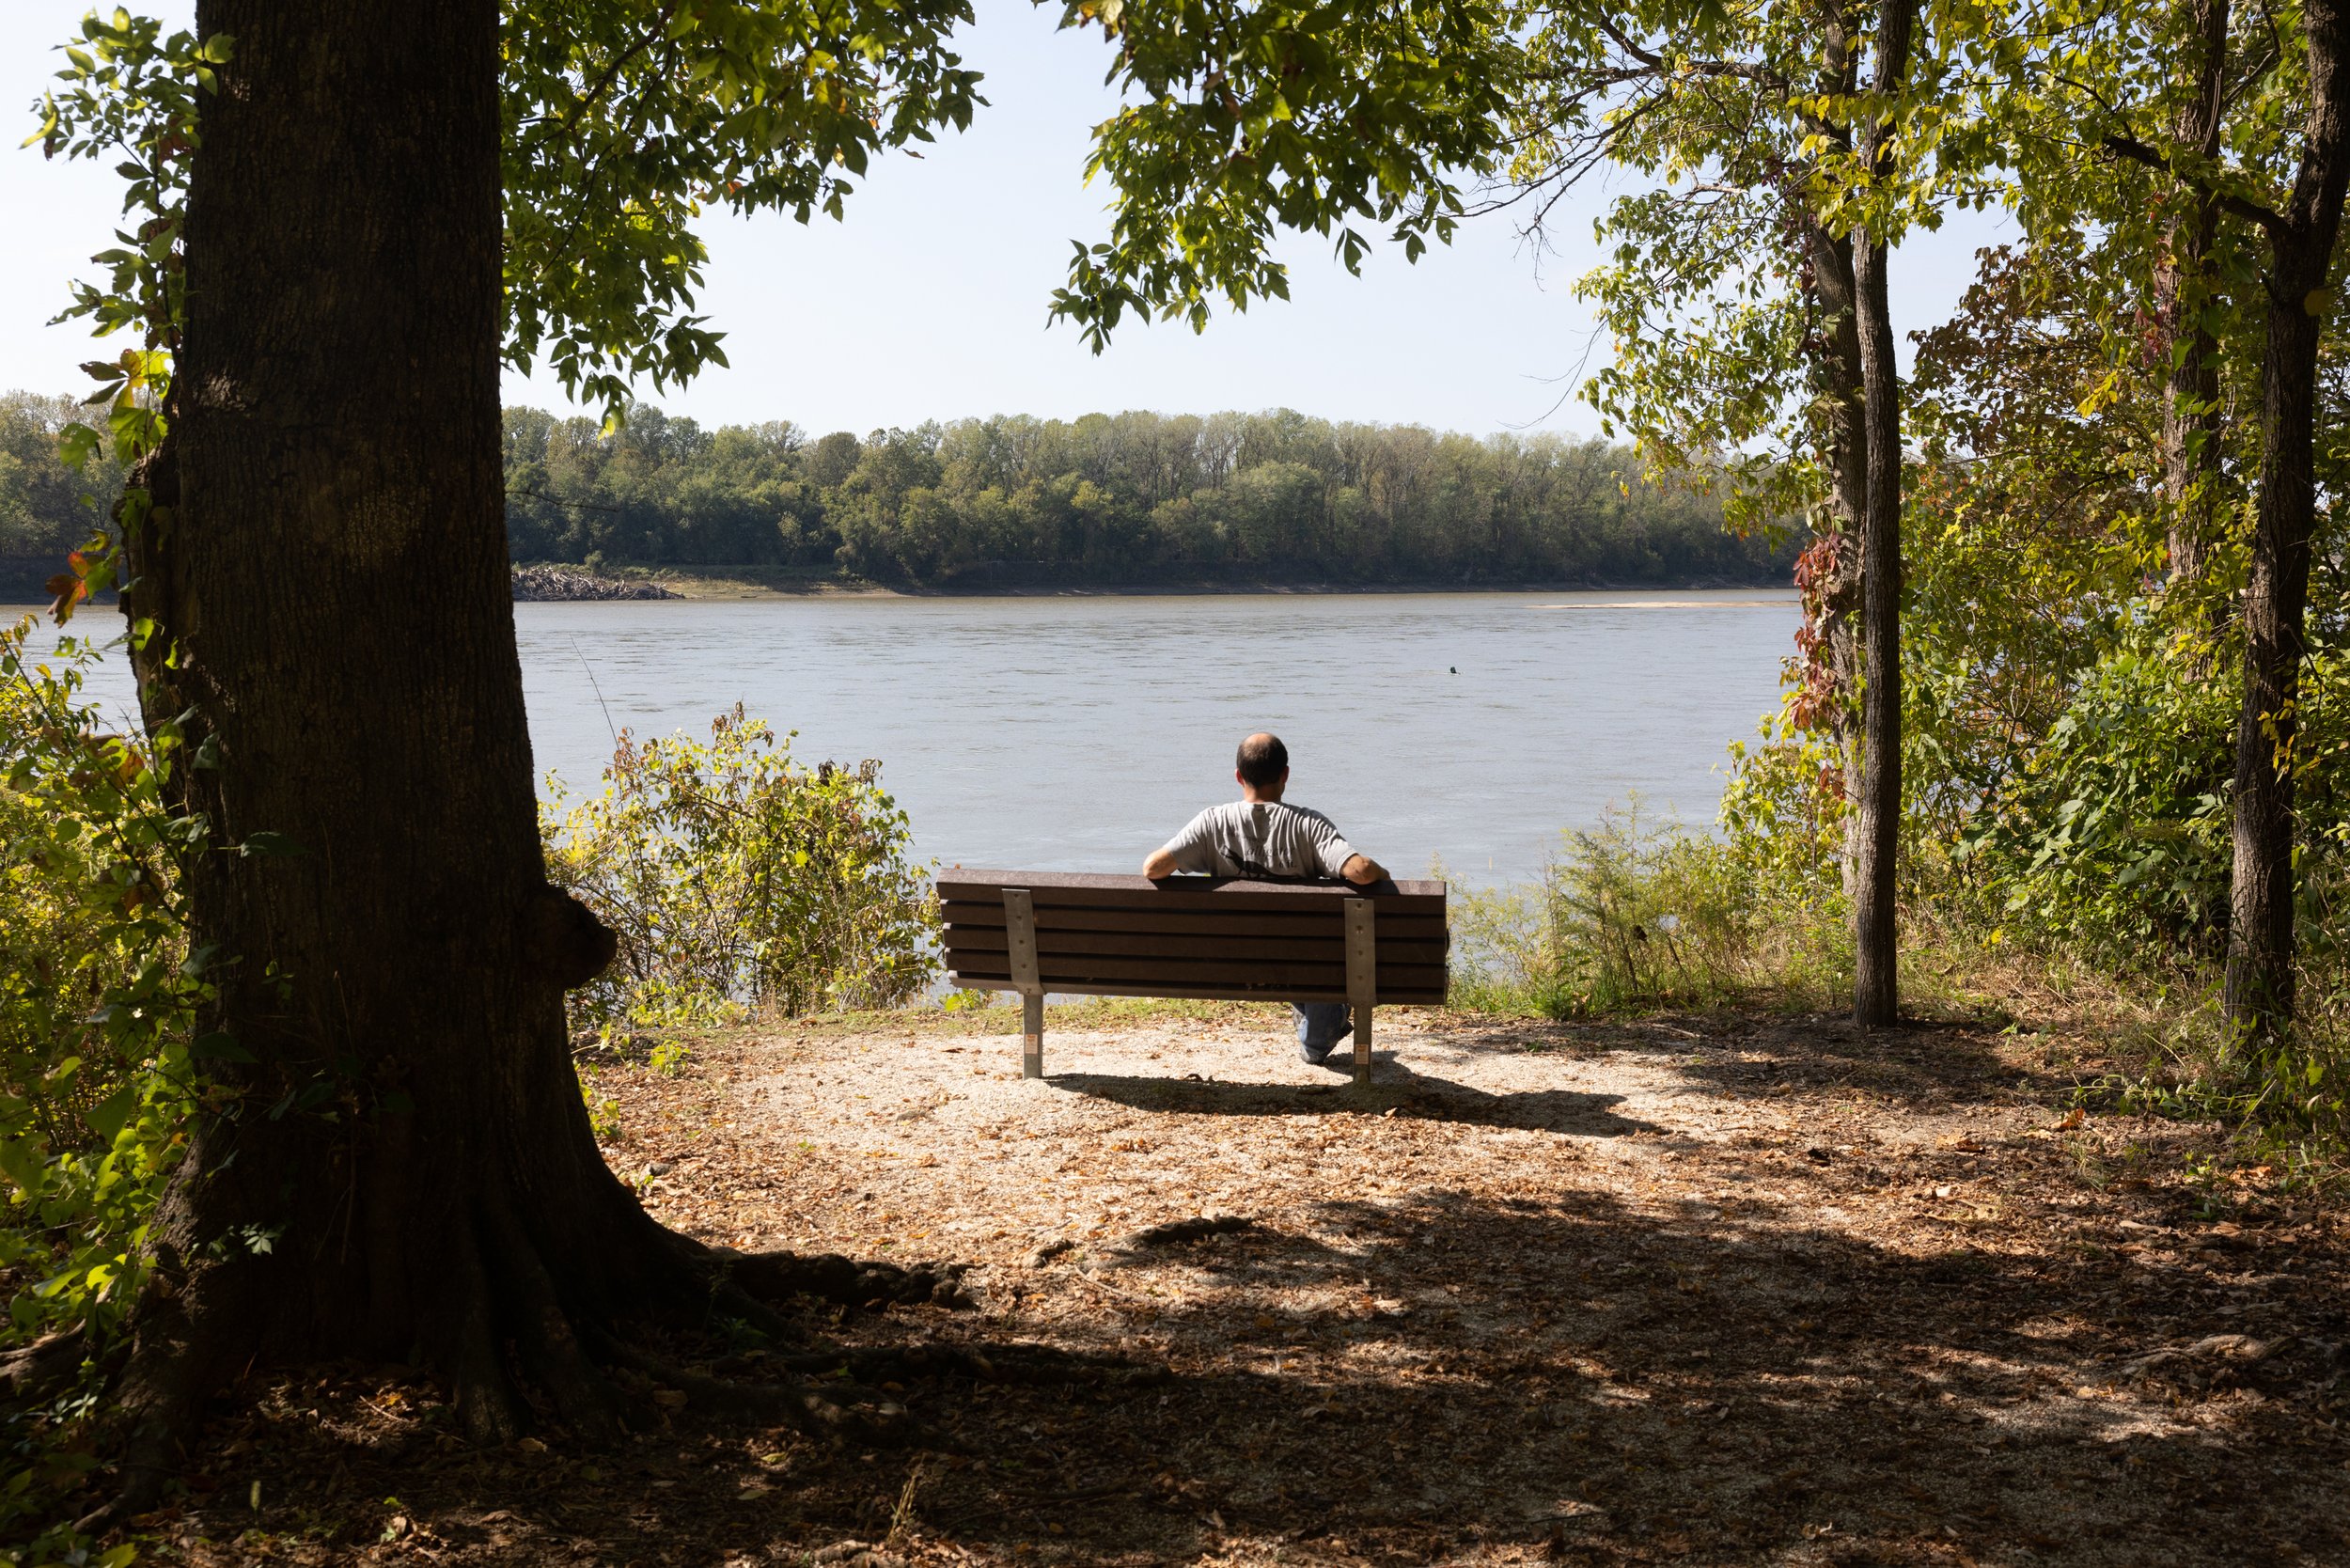  Brandon Pals, a parishioner at St. Mary’s Assumption in St. Louis, sat at a bench overlooking the Missouri River during a Katy Trail Marian Pilgrimage on Oct. 11 along the Katy Trail in Warren County, Missouri.  